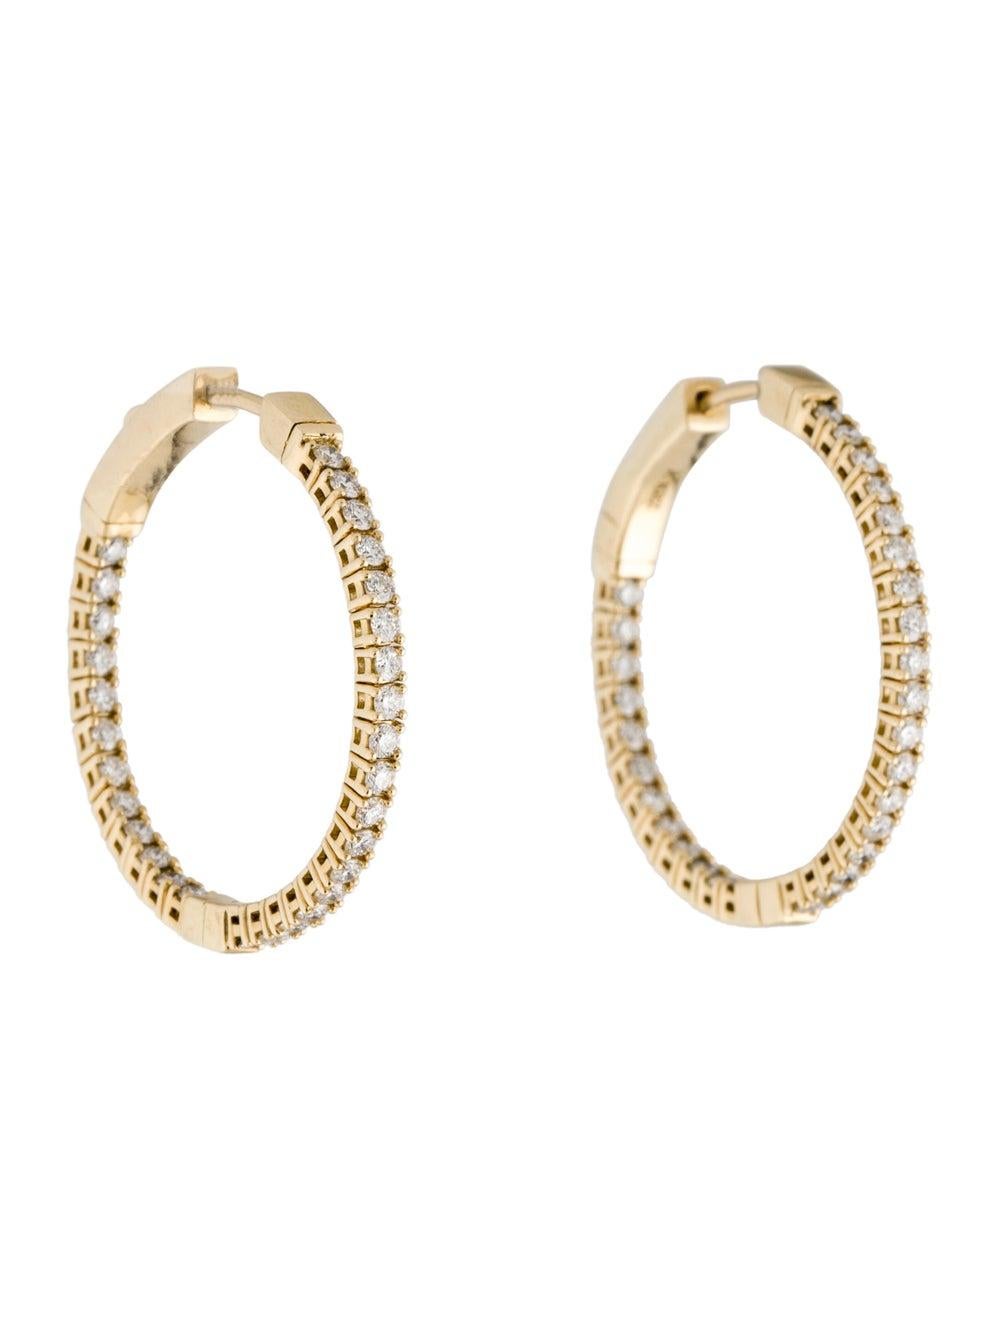 14 Karat Yellow Gold 1.09 Carat Diamond Flexible Hoop Earrings In New Condition For Sale In Great neck, NY